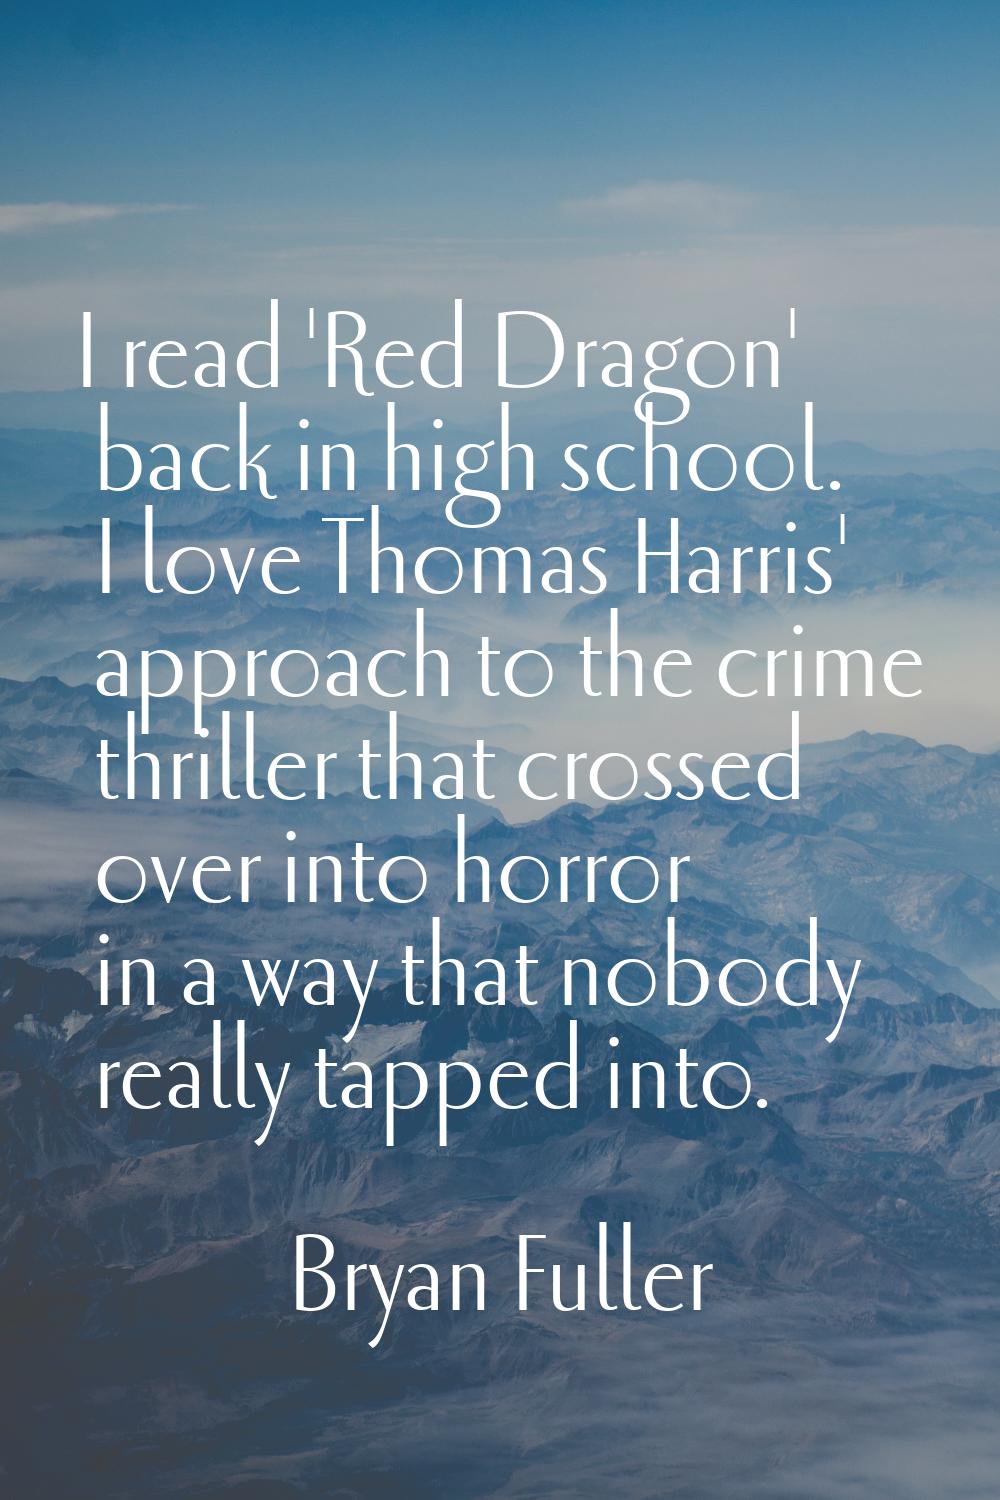 I read 'Red Dragon' back in high school. I love Thomas Harris' approach to the crime thriller that 